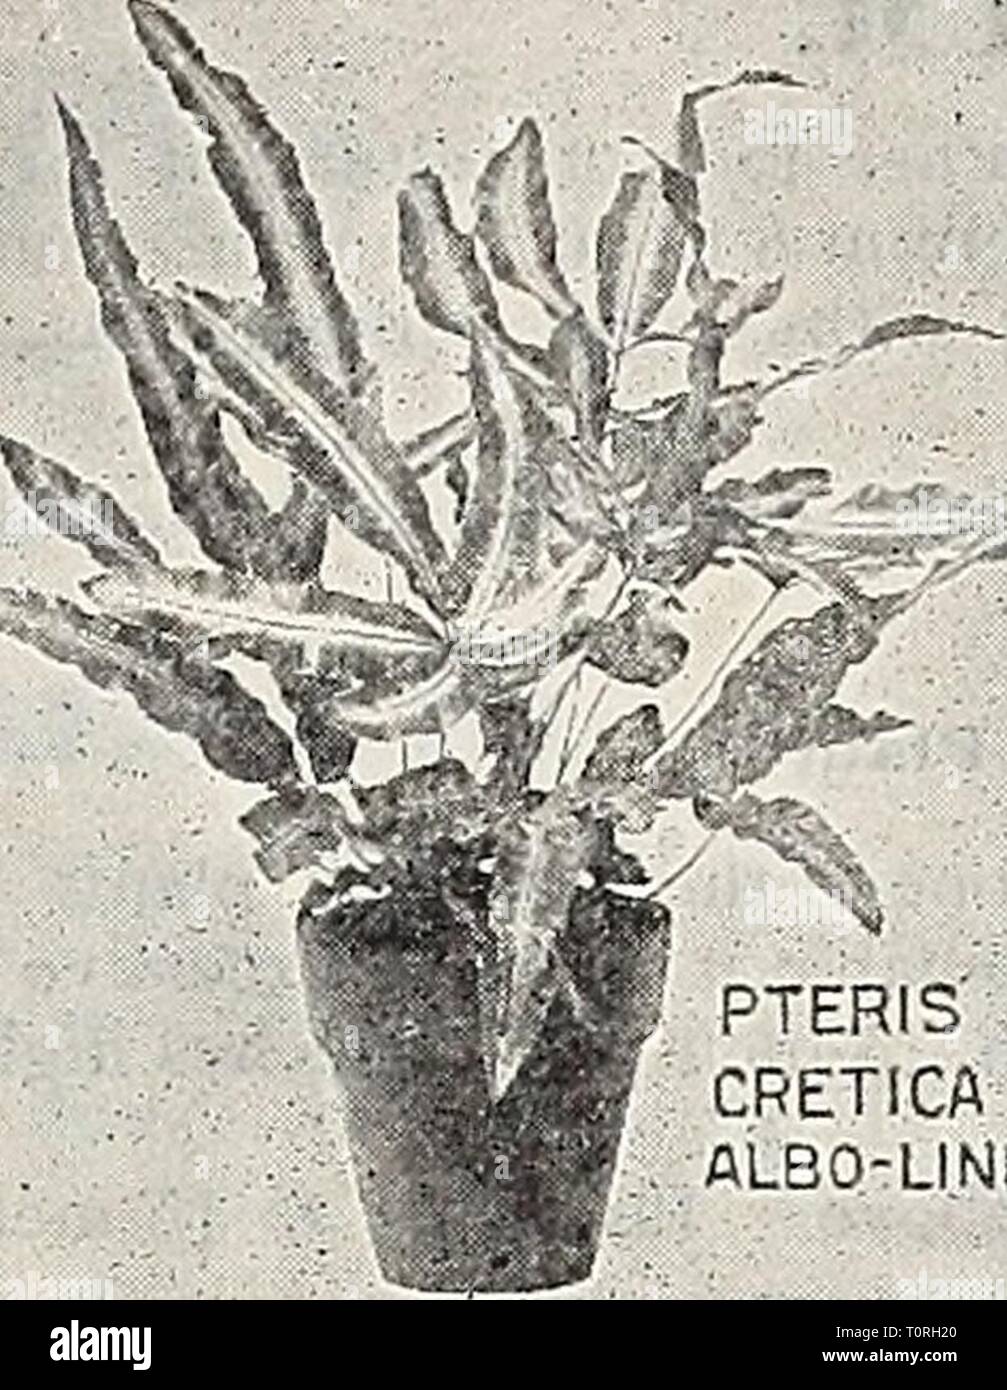 Dreer's 1907 garden book (1907) Dreer's 1907 garden book  dreers1907garden1907henr Year: 1907  *^%%%%%%%%. '' SELAGINELLA CASSIA ARBOREA    PTERIS CRETICA '':â ..â ALBO-LINEATA' * Lomaria Ciliata. A dwarf Tree Fern. 15 cts. Lygodium Dichotomum. A climbing species, with large, heavy pinnse. 15 cts. â Japonicum. A beautiful Japanese climbing Fern. 15 cts. â Scaudens. A climbing variety with light'green foliage. 15 cts. *Miorolepia Hirta Cristatit. A most useful decorative Fern, beautifully crested. 15 cts. and 25 cts. â Hispida. A graceful dwarf-growing variety. 15 cts. *Nephrolepis Cordata Comp Stock Photo